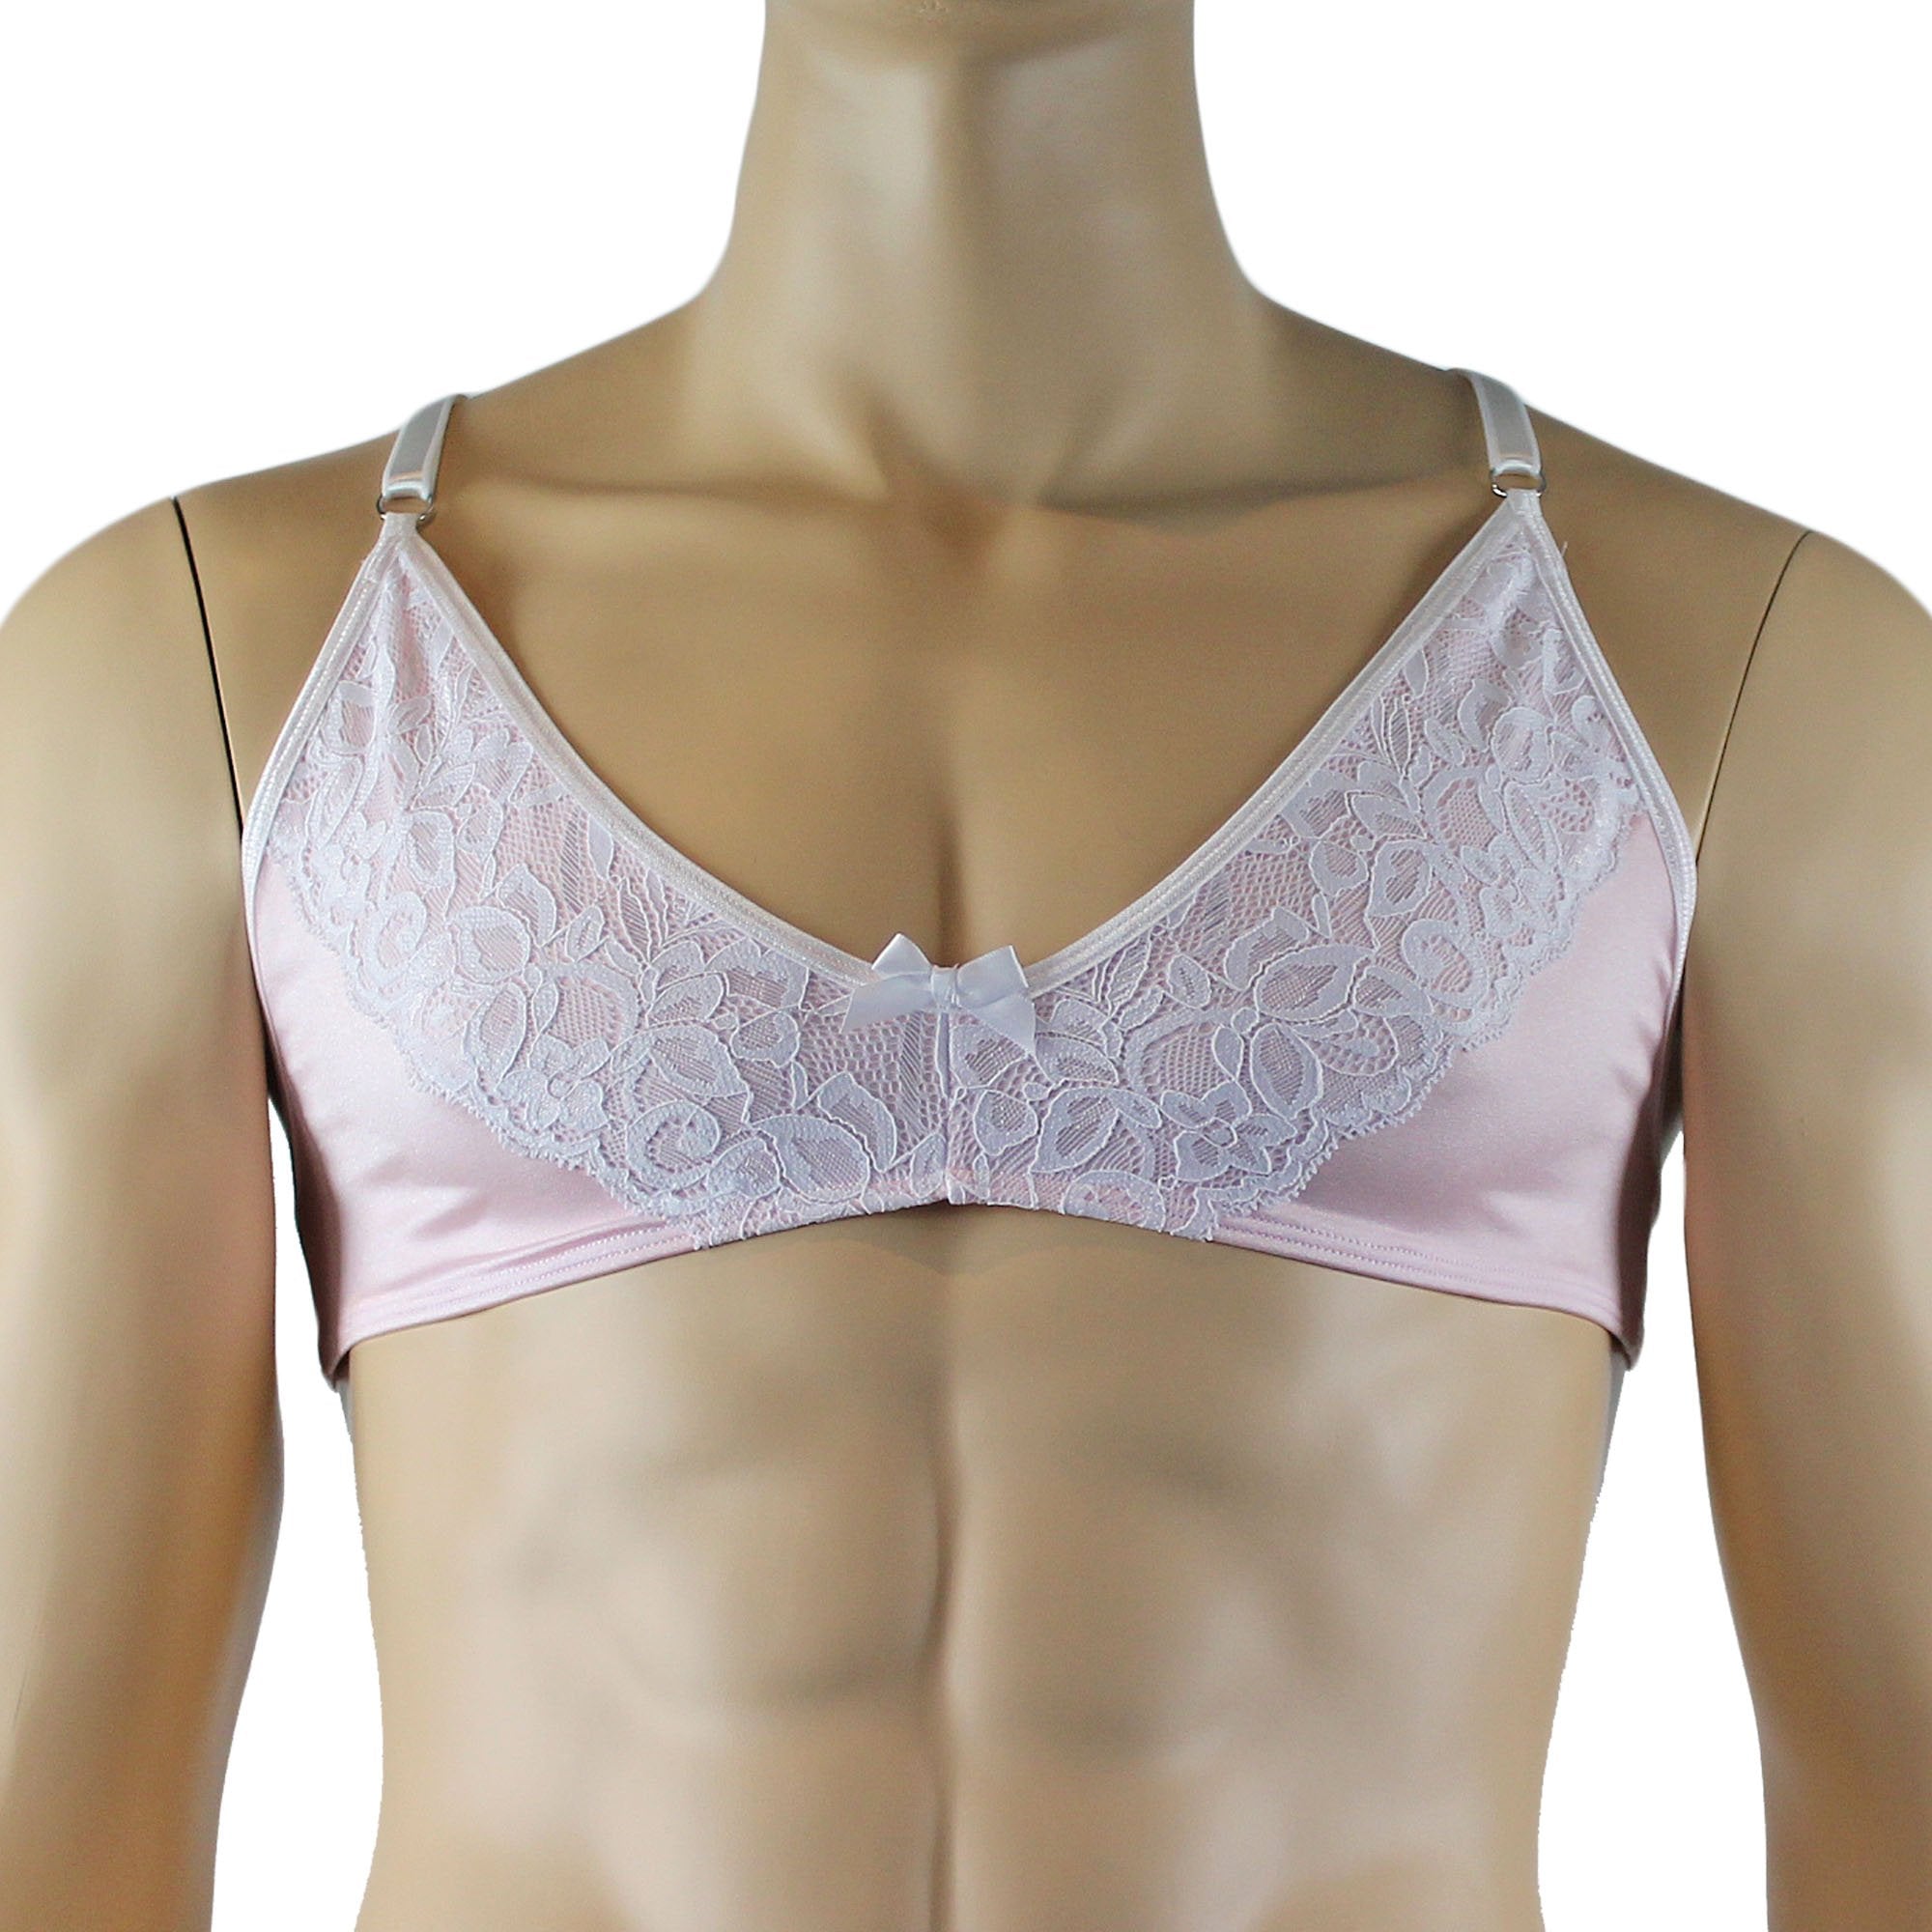 Mens Isabel Bra Top with Floral Lace Trim Male Lingerie Light Pink and White Lace